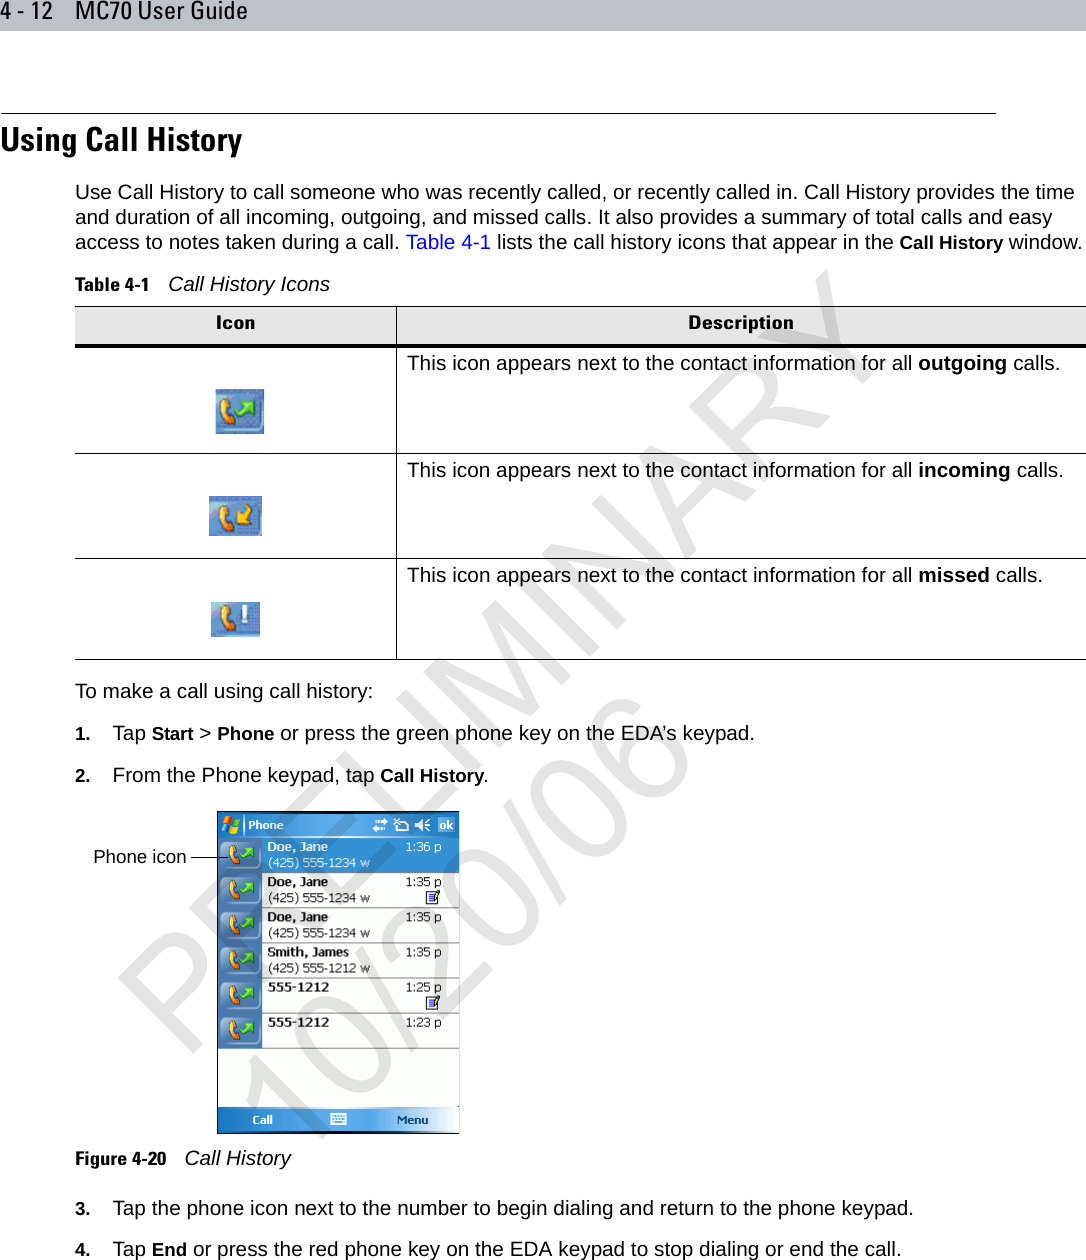 4 - 12 MC70 User GuideUsing Call HistoryUse Call History to call someone who was recently called, or recently called in. Call History provides the time and duration of all incoming, outgoing, and missed calls. It also provides a summary of total calls and easy access to notes taken during a call. Table 4-1 lists the call history icons that appear in the Call History window.To make a call using call history:1. Tap Start &gt; Phone or press the green phone key on the EDA’s keypad.2. From the Phone keypad, tap Call History.Figure 4-20    Call History3. Tap the phone icon next to the number to begin dialing and return to the phone keypad.4. Tap End or press the red phone key on the EDA keypad to stop dialing or end the call.Table 4-1    Call History IconsIcon DescriptionThis icon appears next to the contact information for all outgoing calls. This icon appears next to the contact information for all incoming calls.This icon appears next to the contact information for all missed calls.Phone iconPRELIMINARY10/20/06